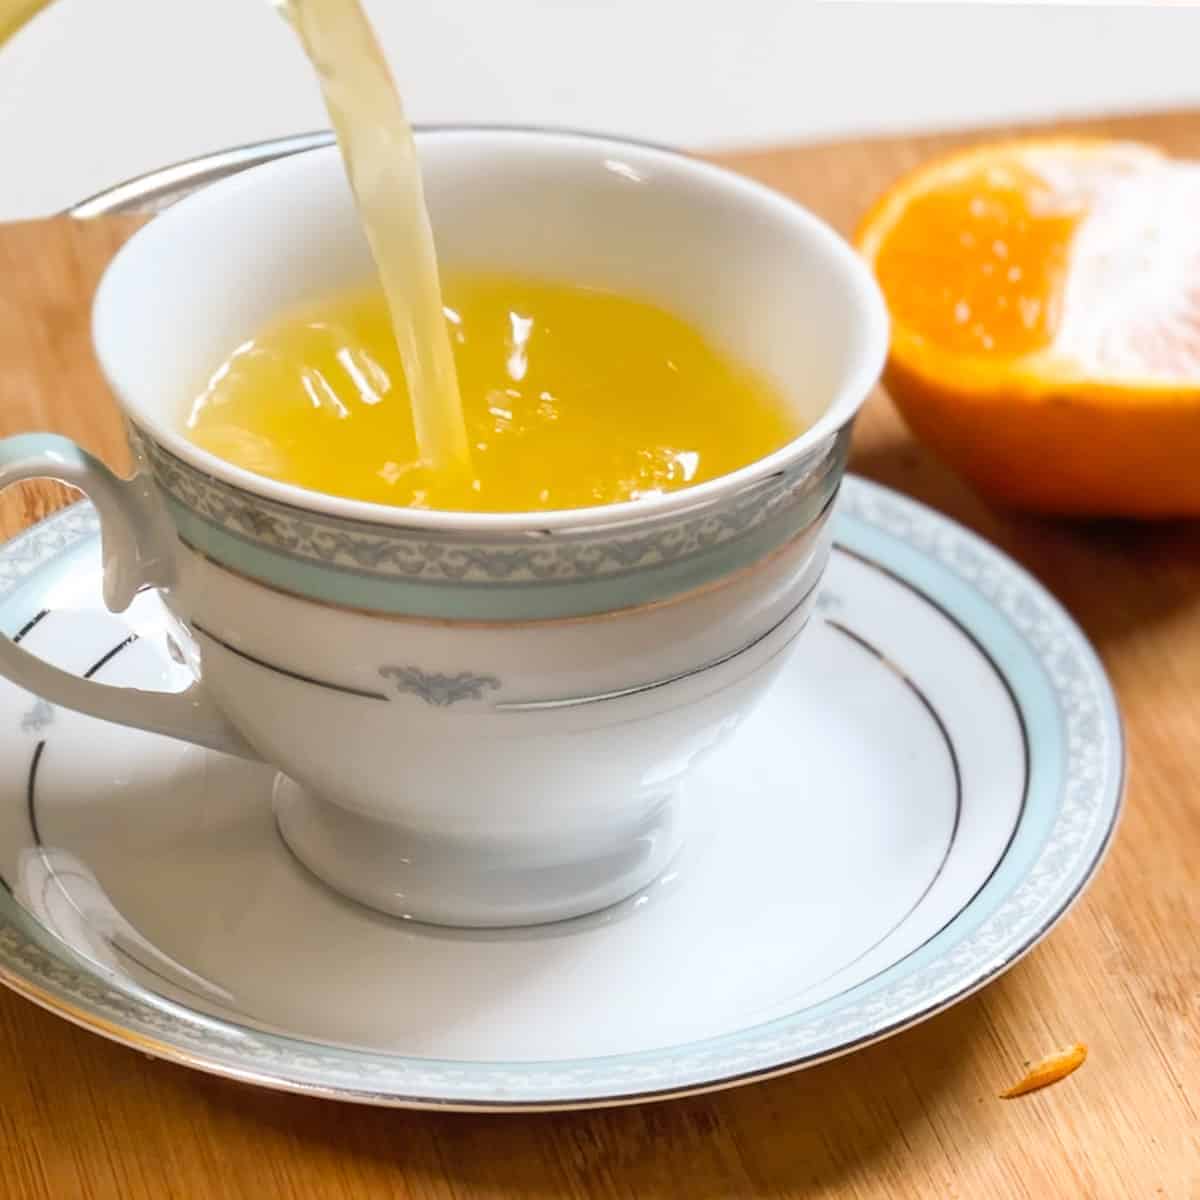 Orange tea being poured in the cup.